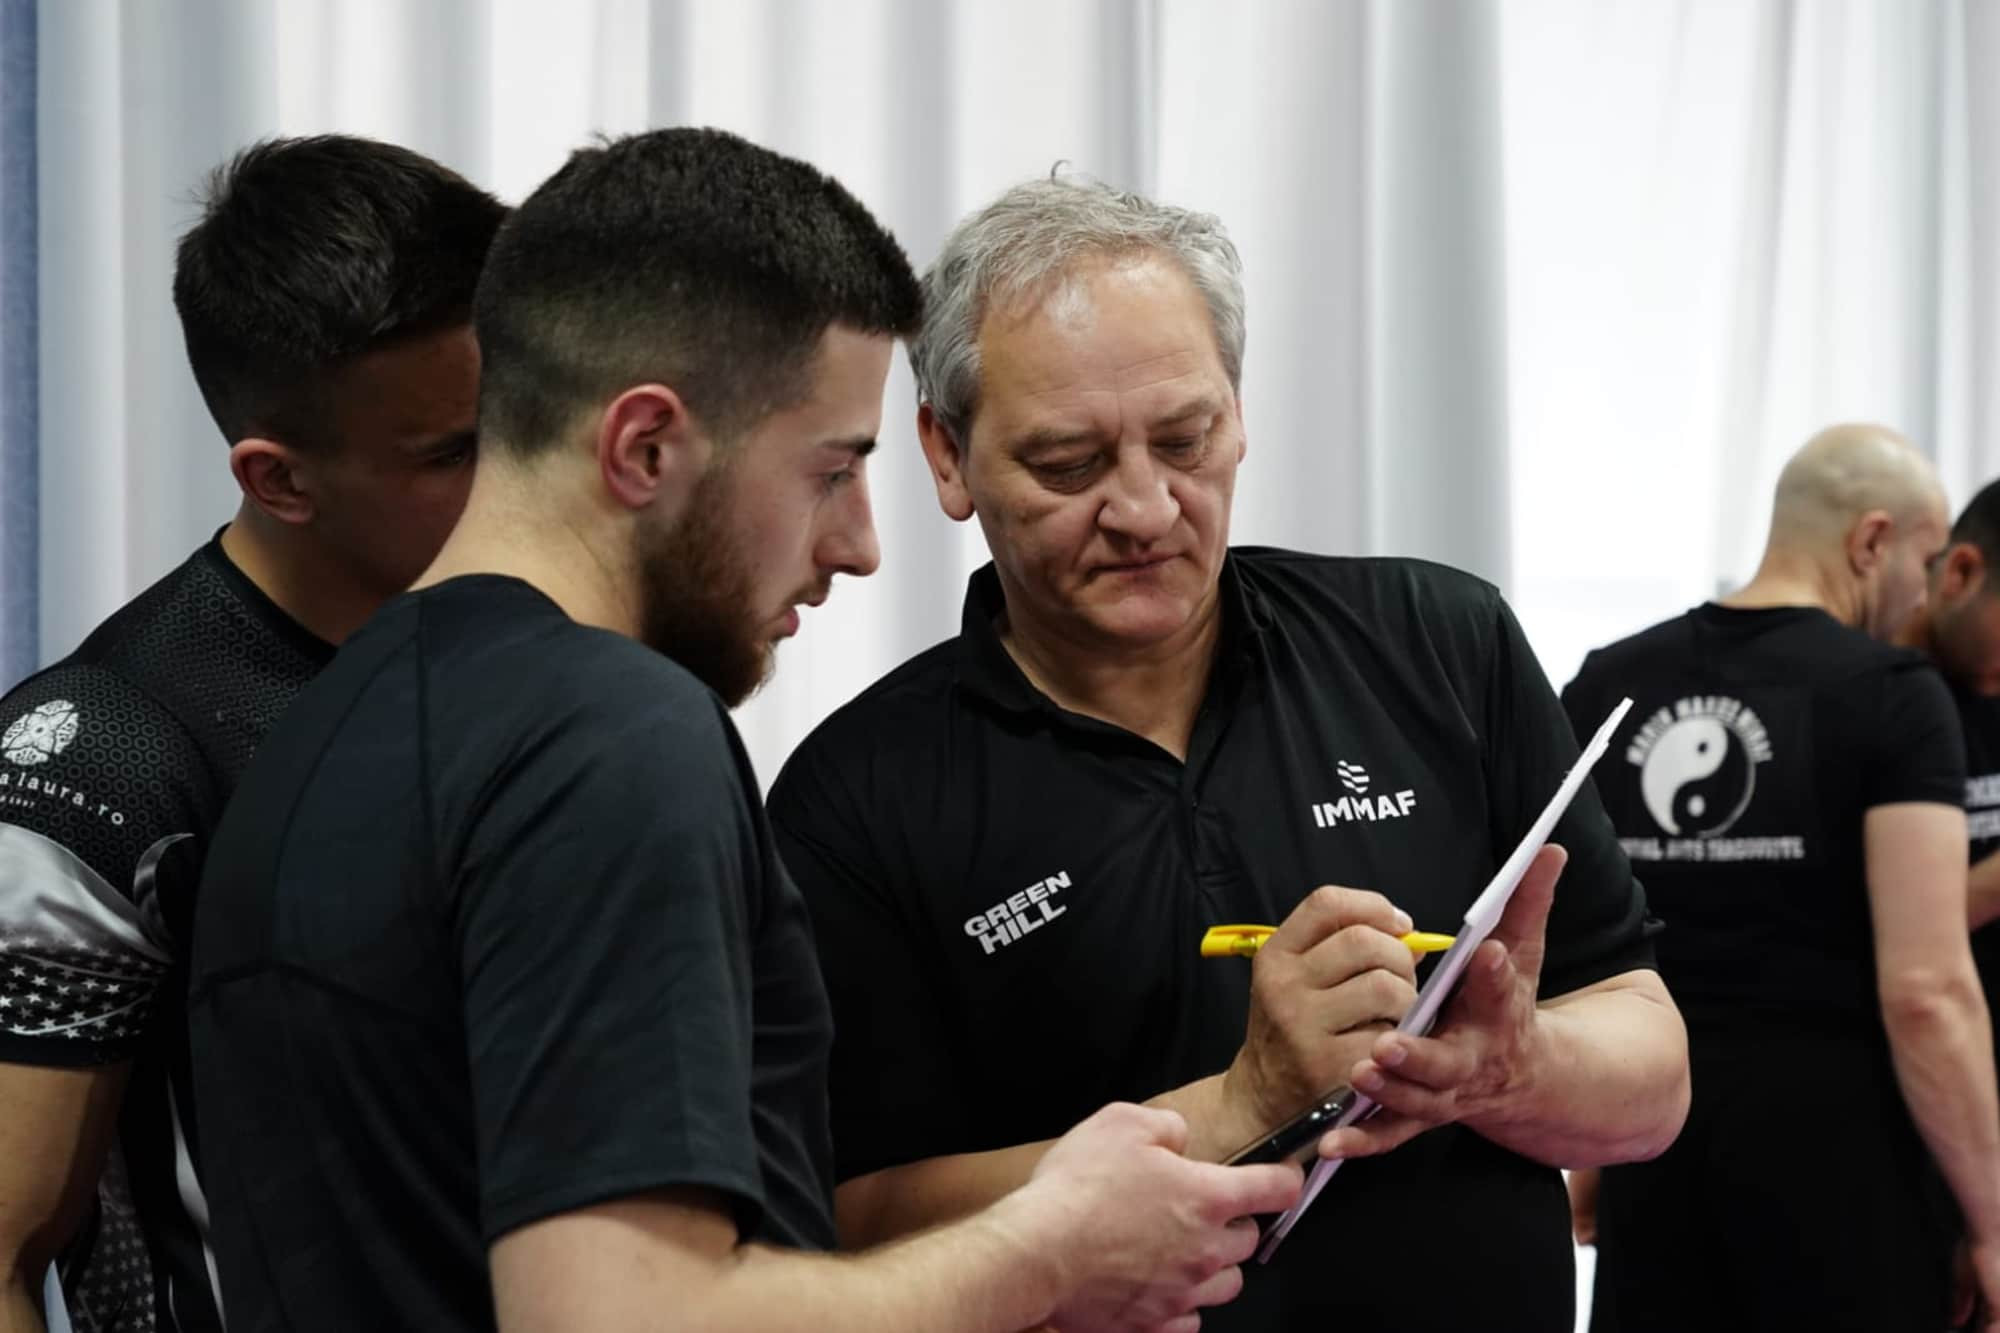 IMMAF coaching certification courses have been staged across the Middle East and Central Asia this year ©IMMAF